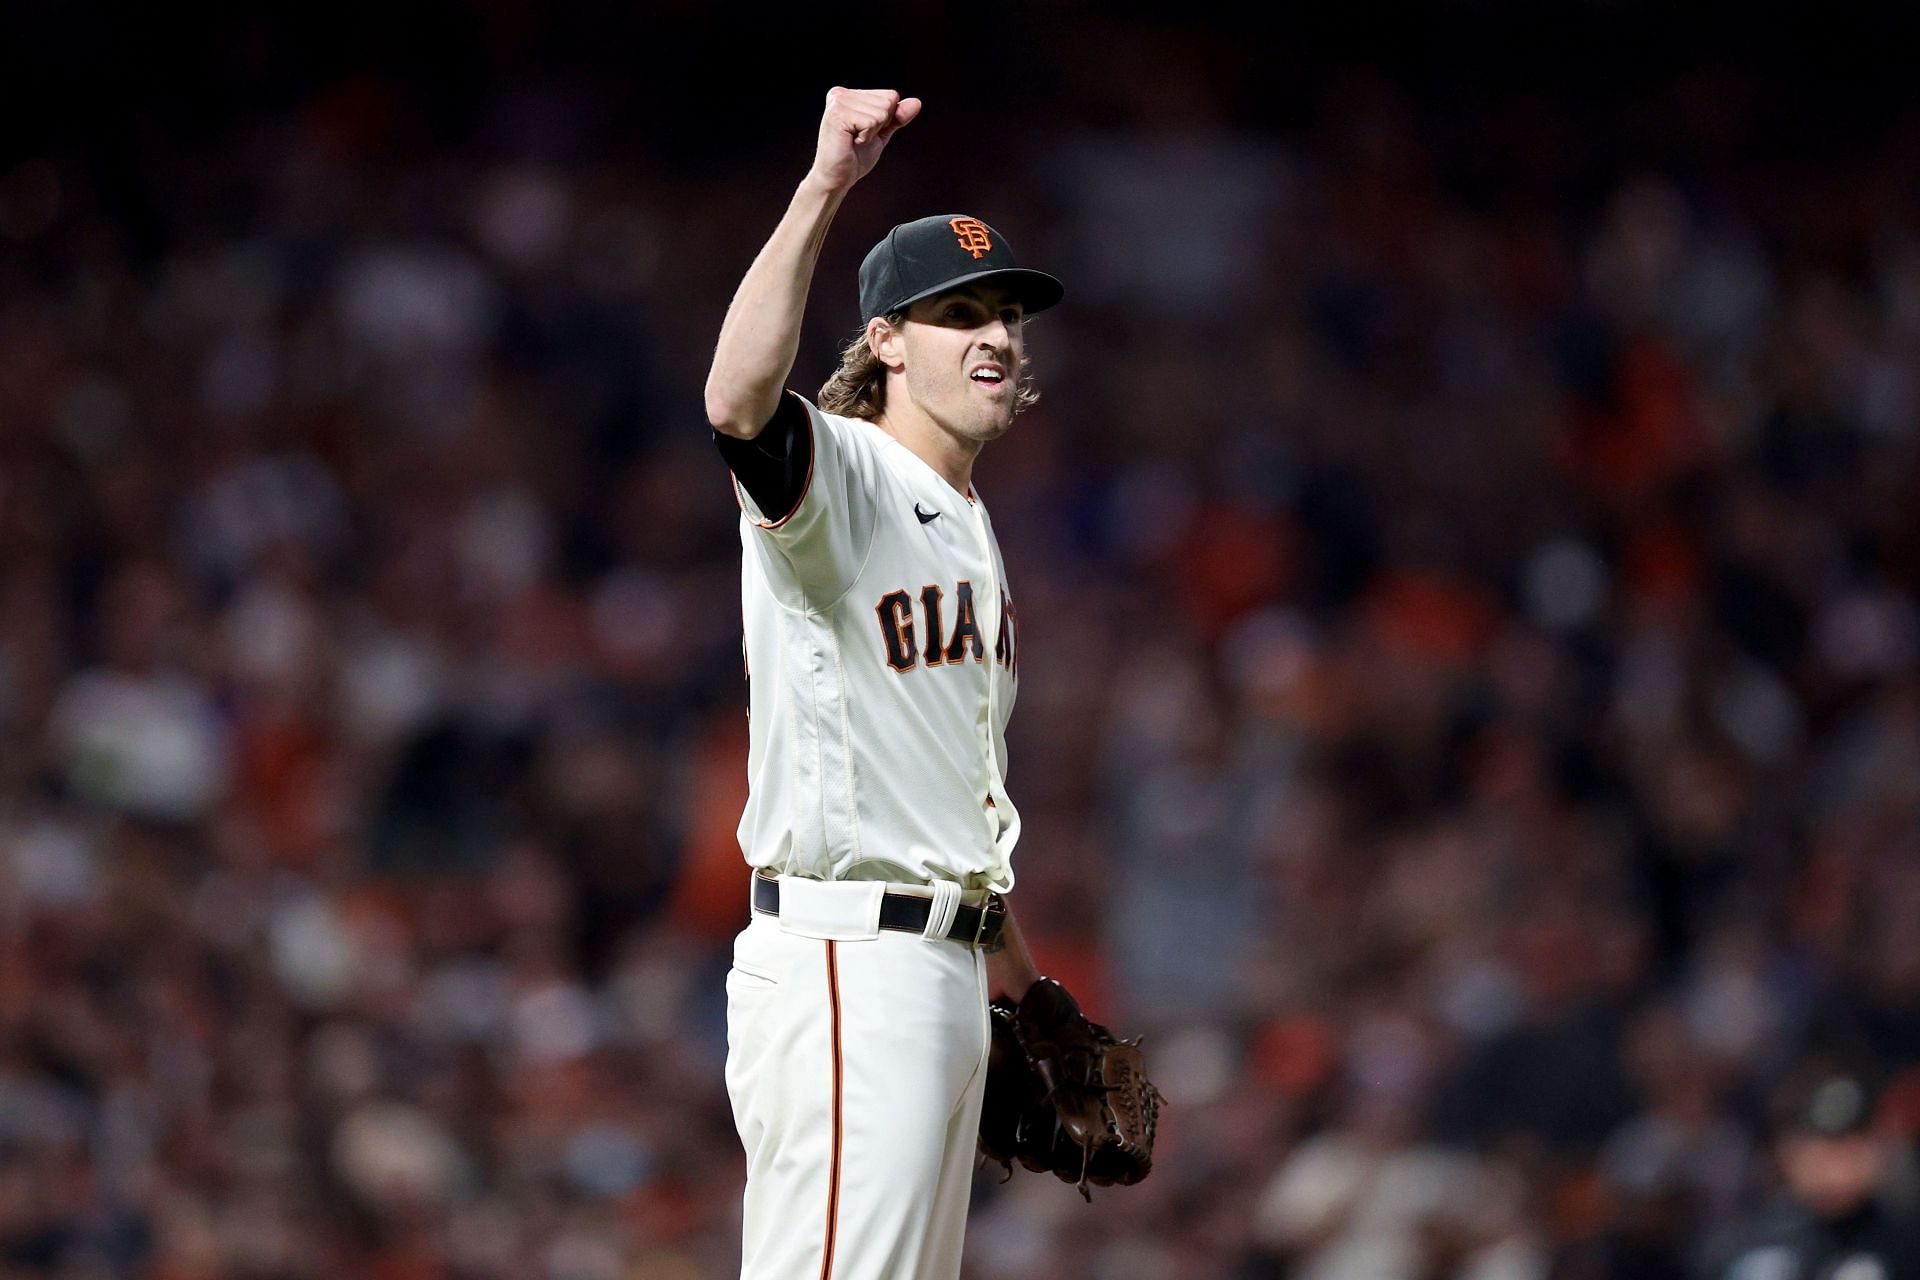 Gausman signed with the Toronto Blue Jays this offseason